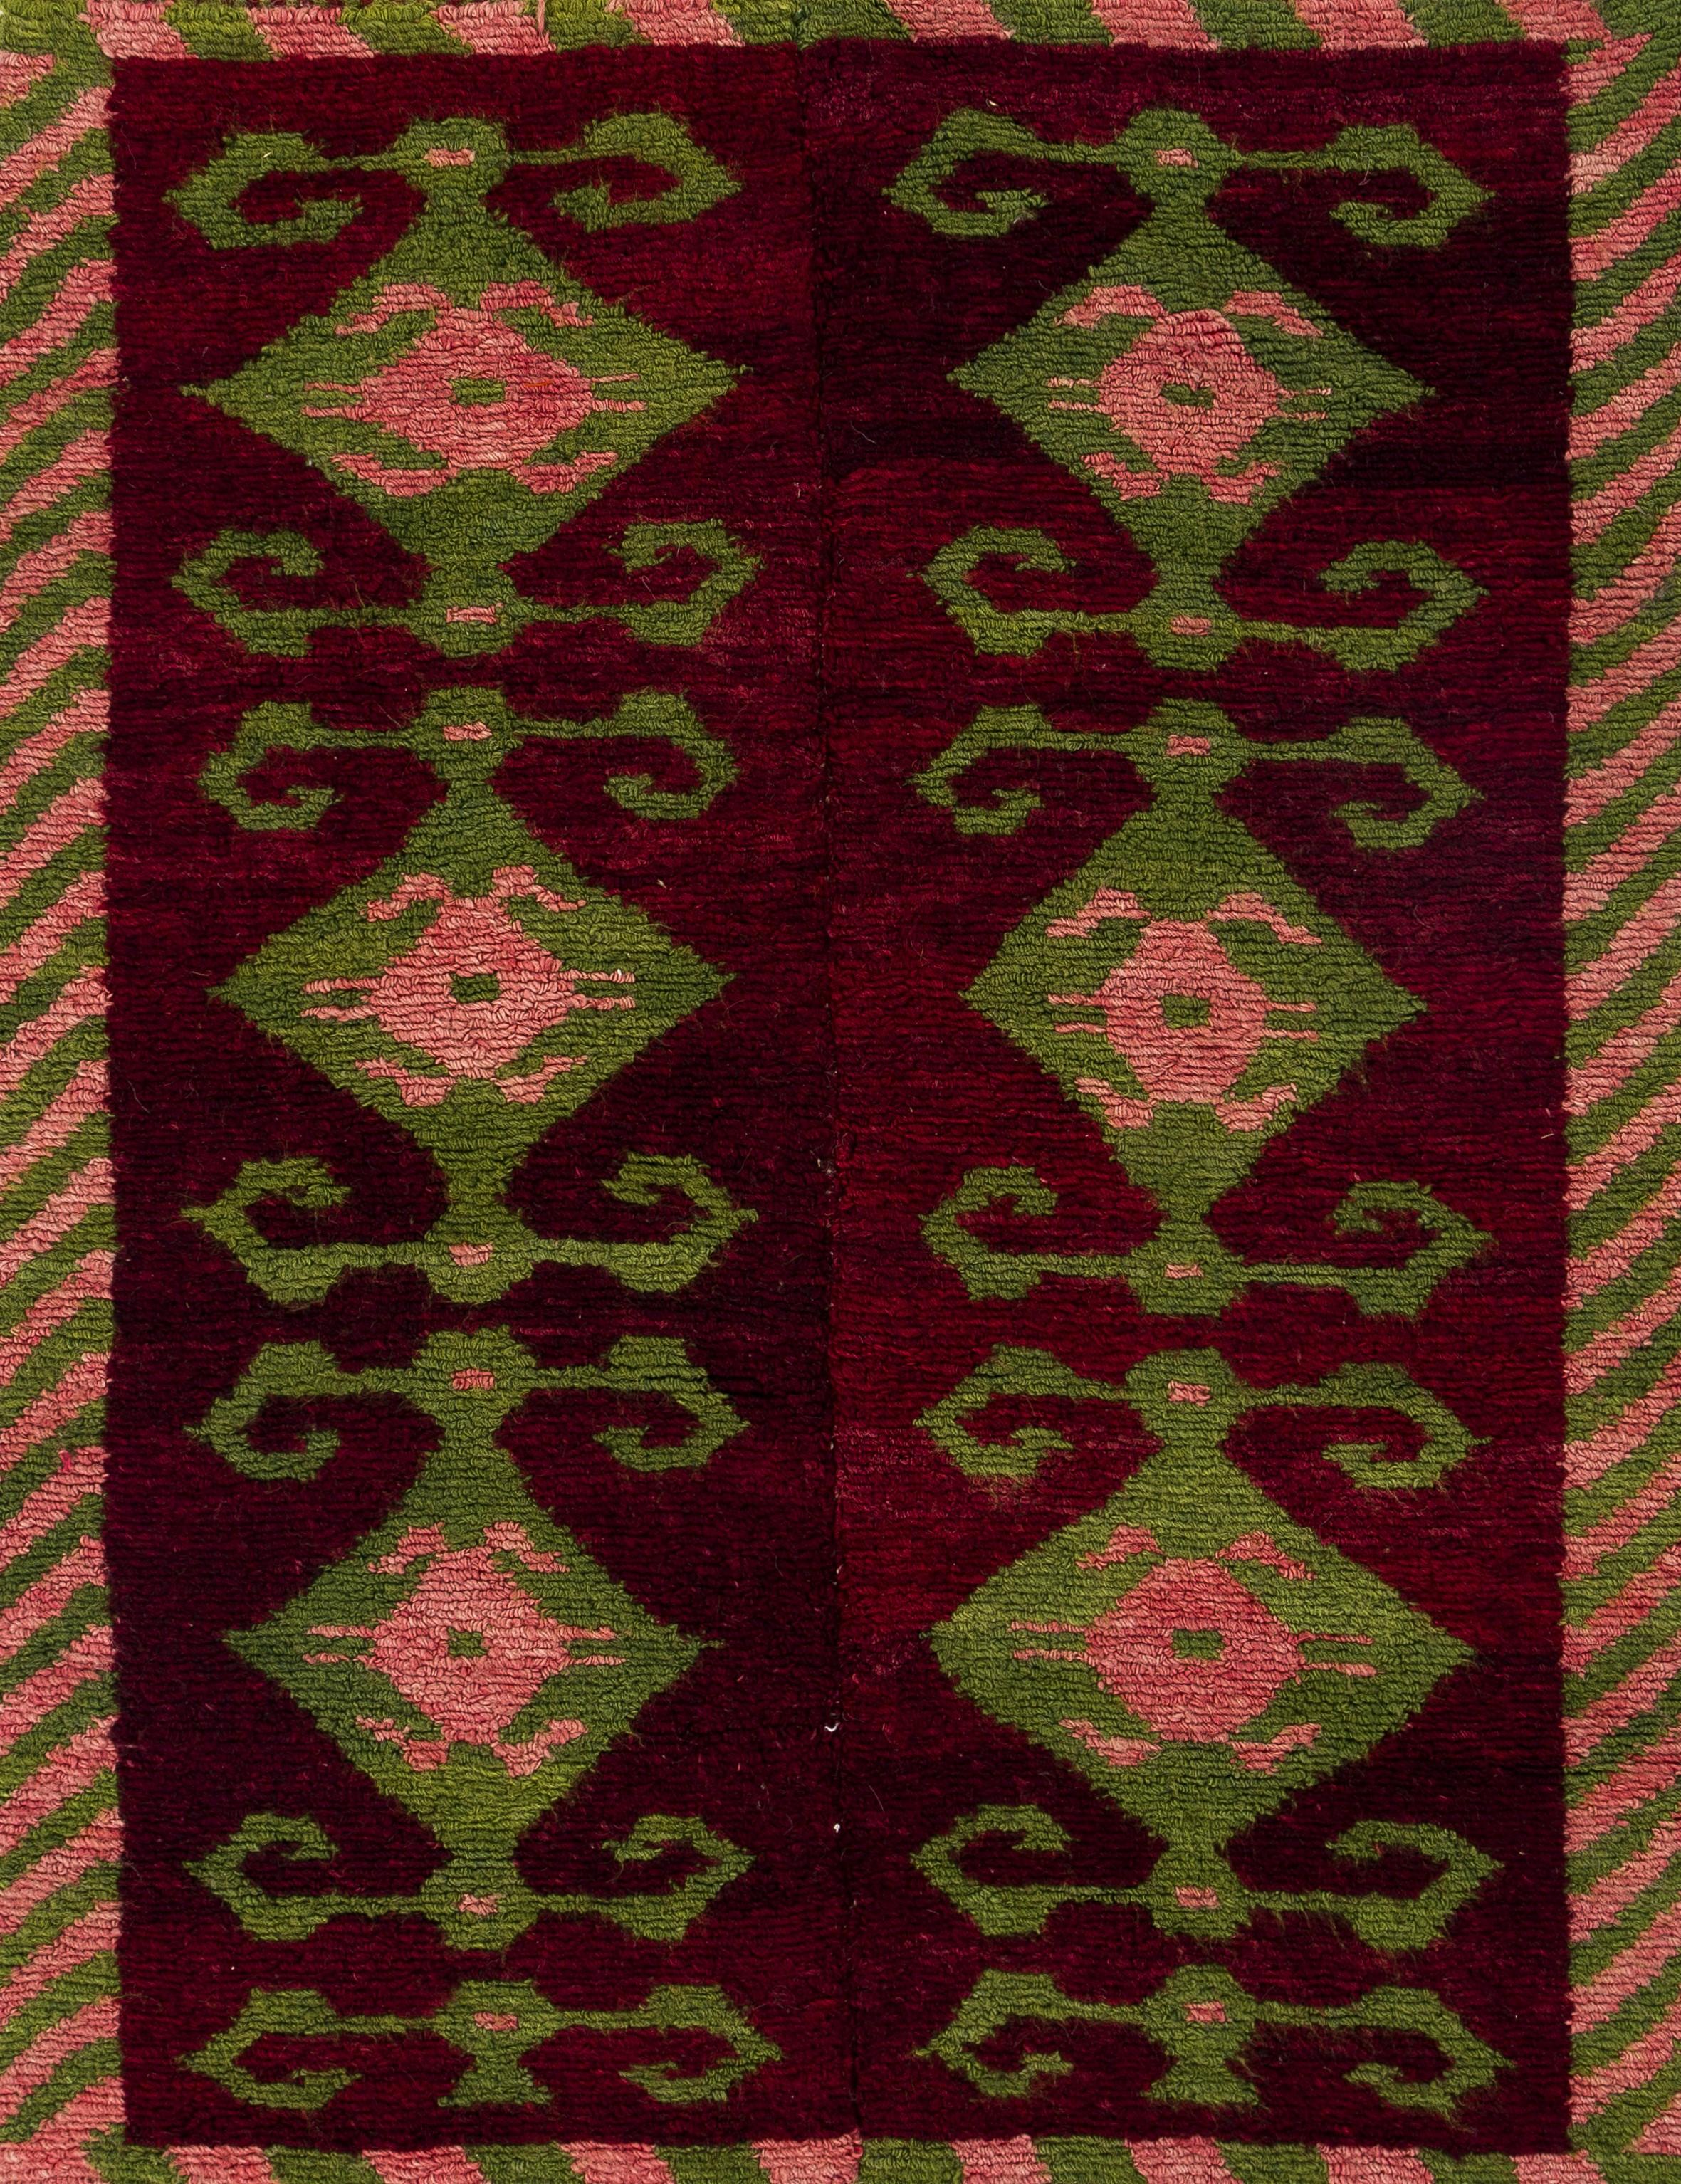 3.6x5 Ft Vintage One-of-a-Kind Hand-Knotted Tulu Wool Rug with Ram’s Horn Design In Good Condition For Sale In Philadelphia, PA